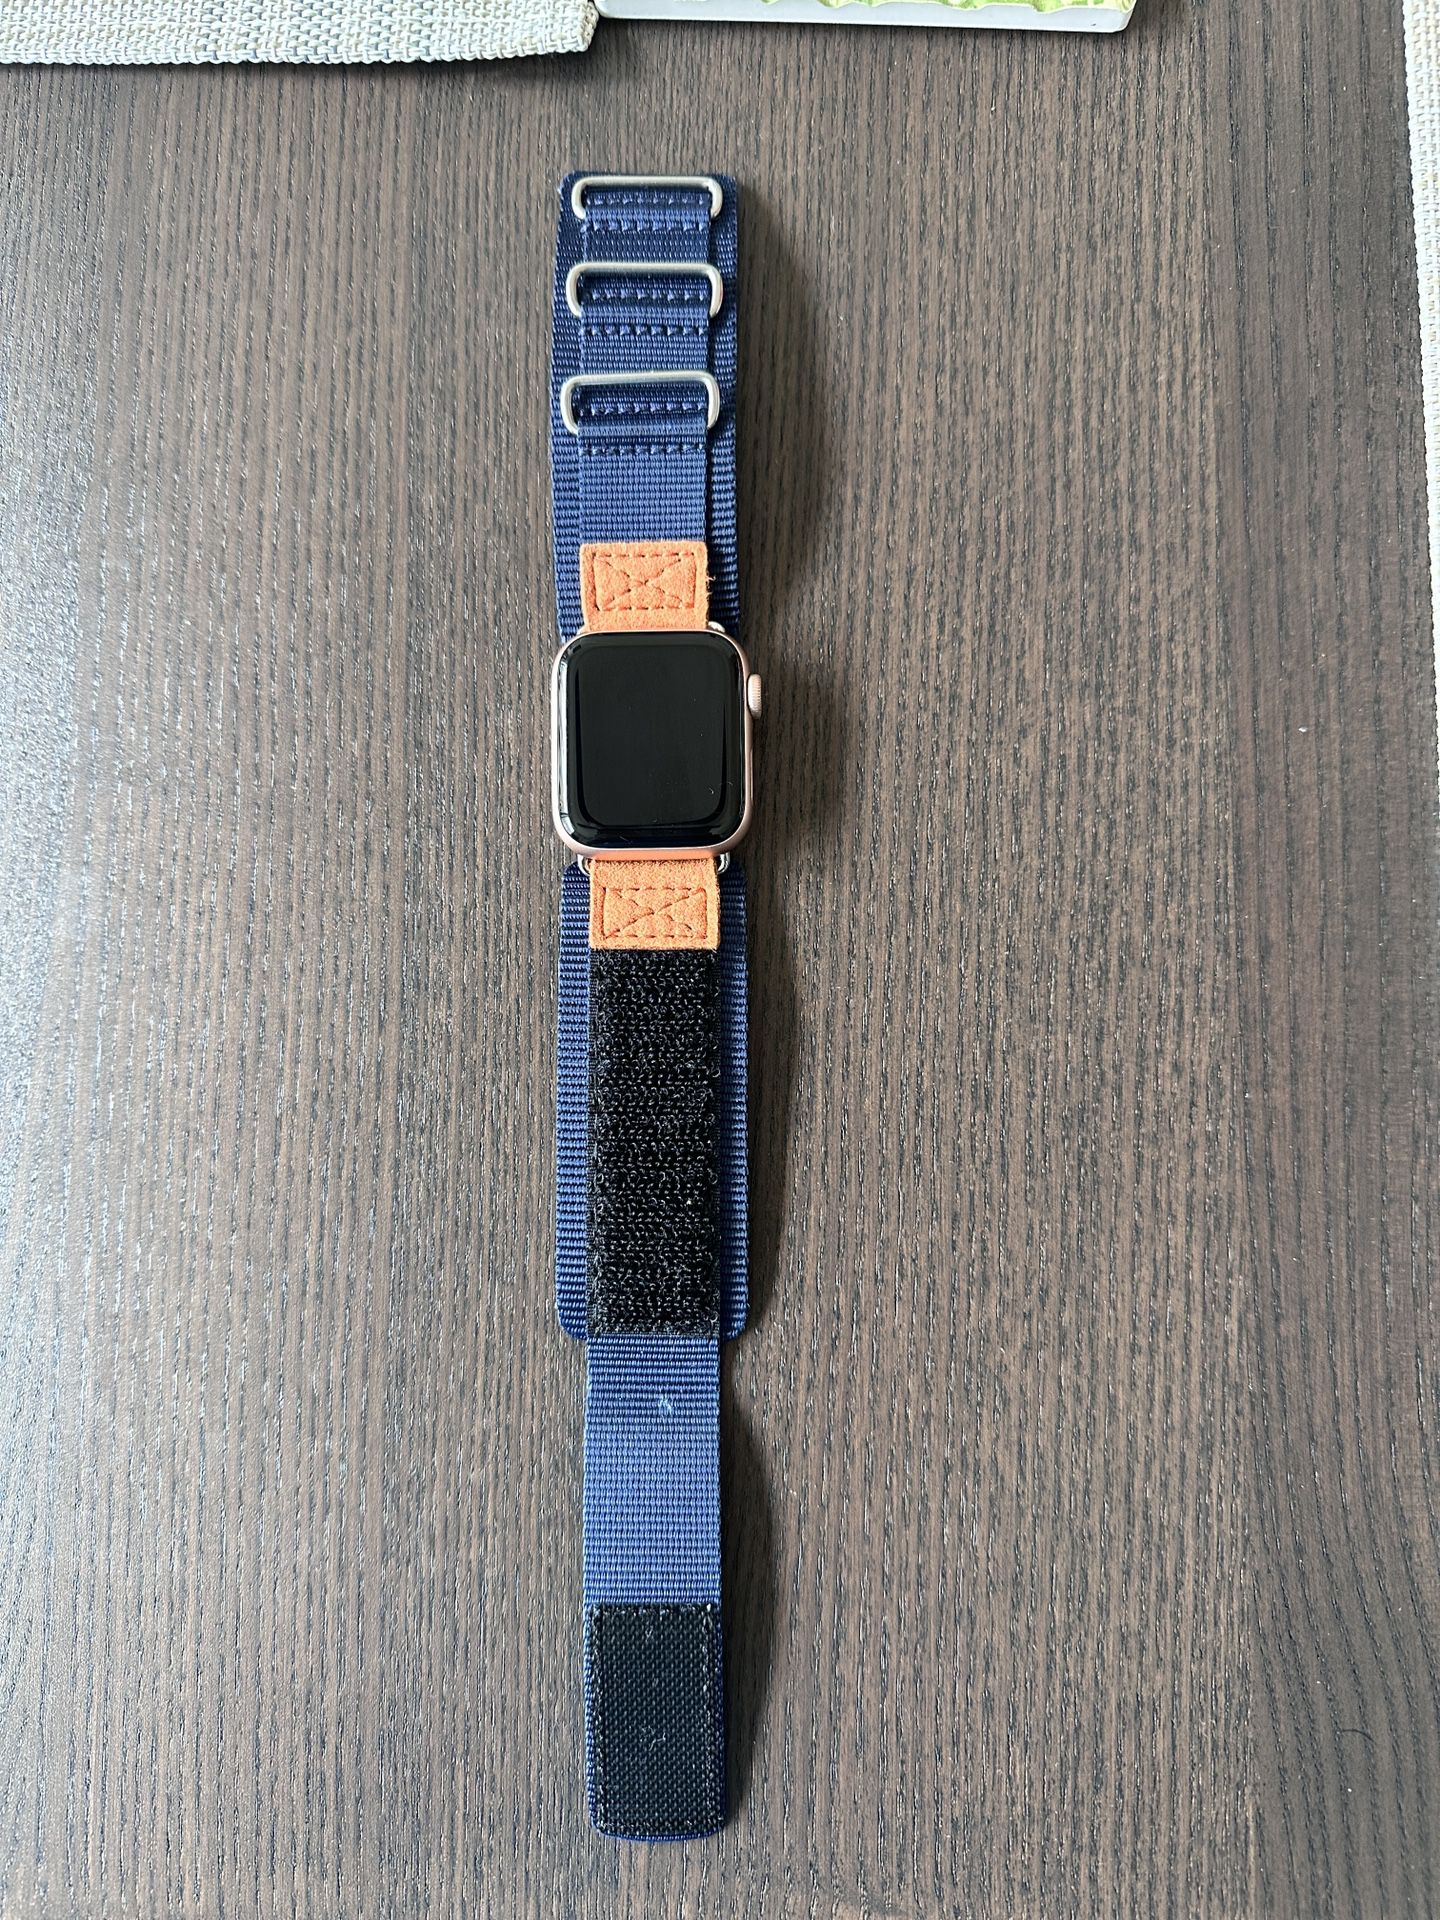 Apple Watch 5 Series In Gold